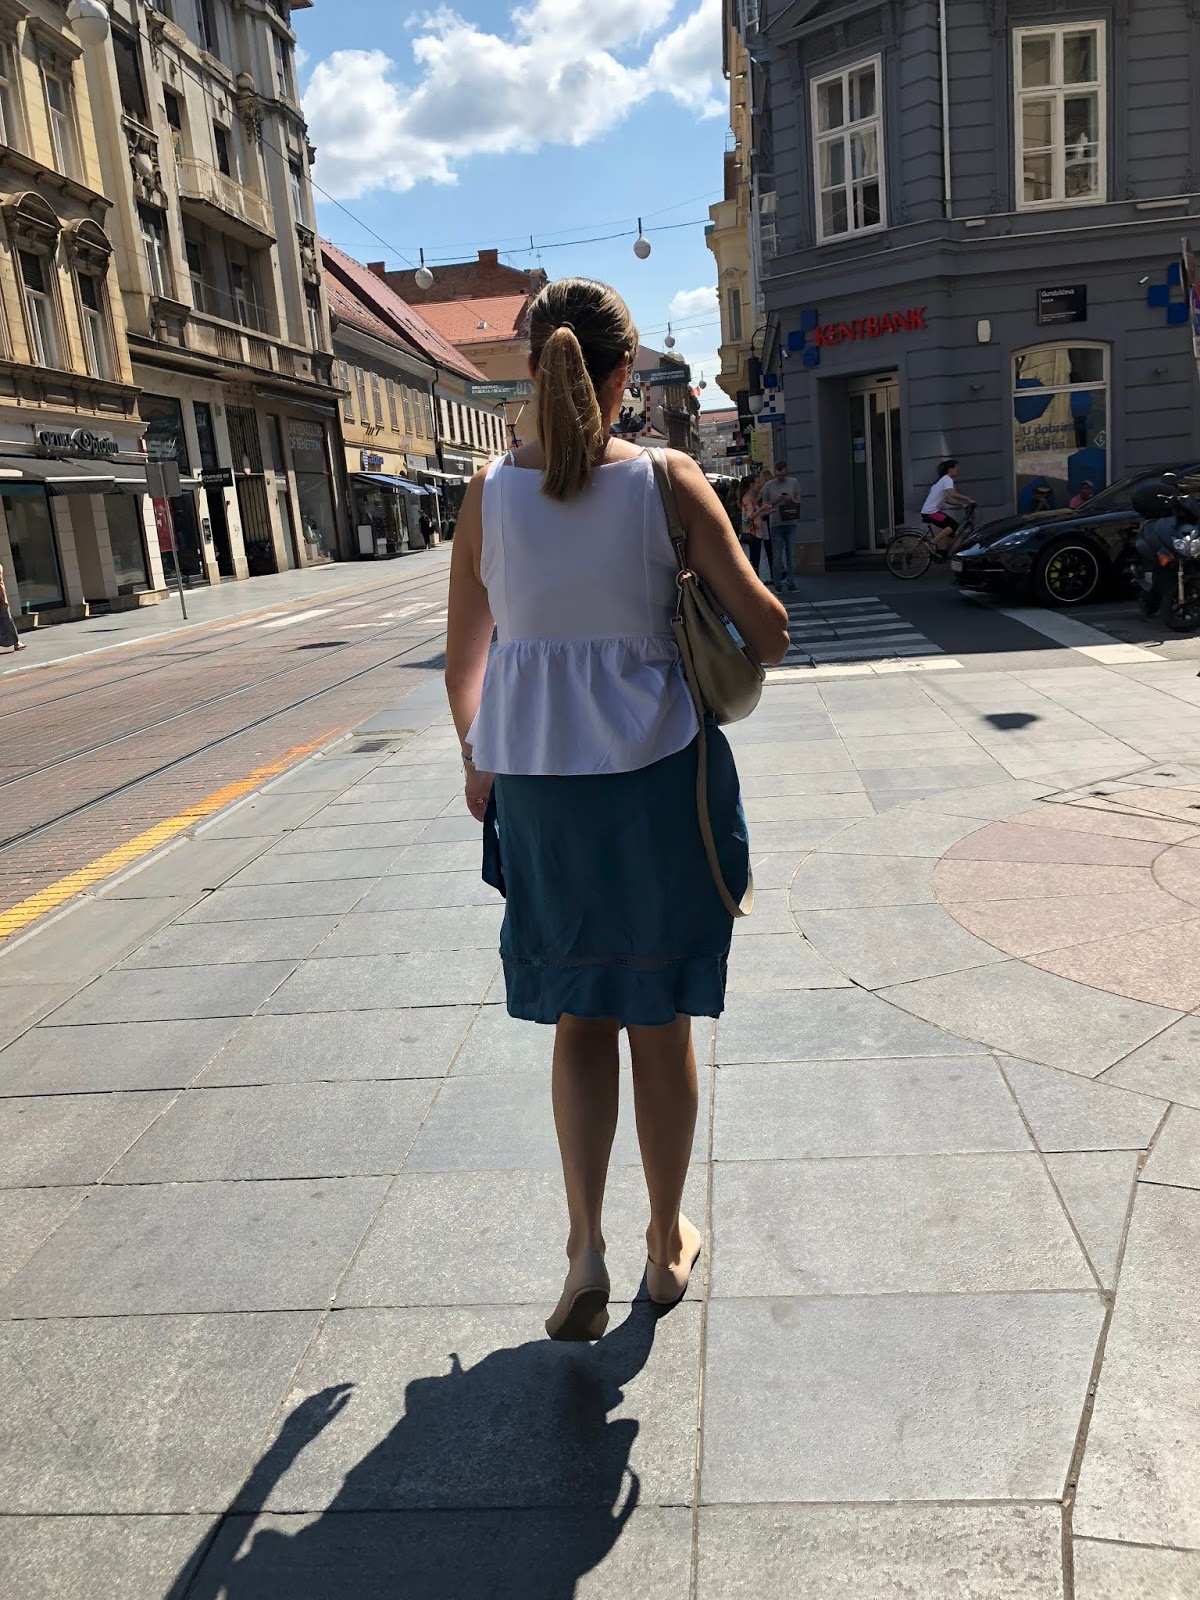 More Zagreb Summer Street Style